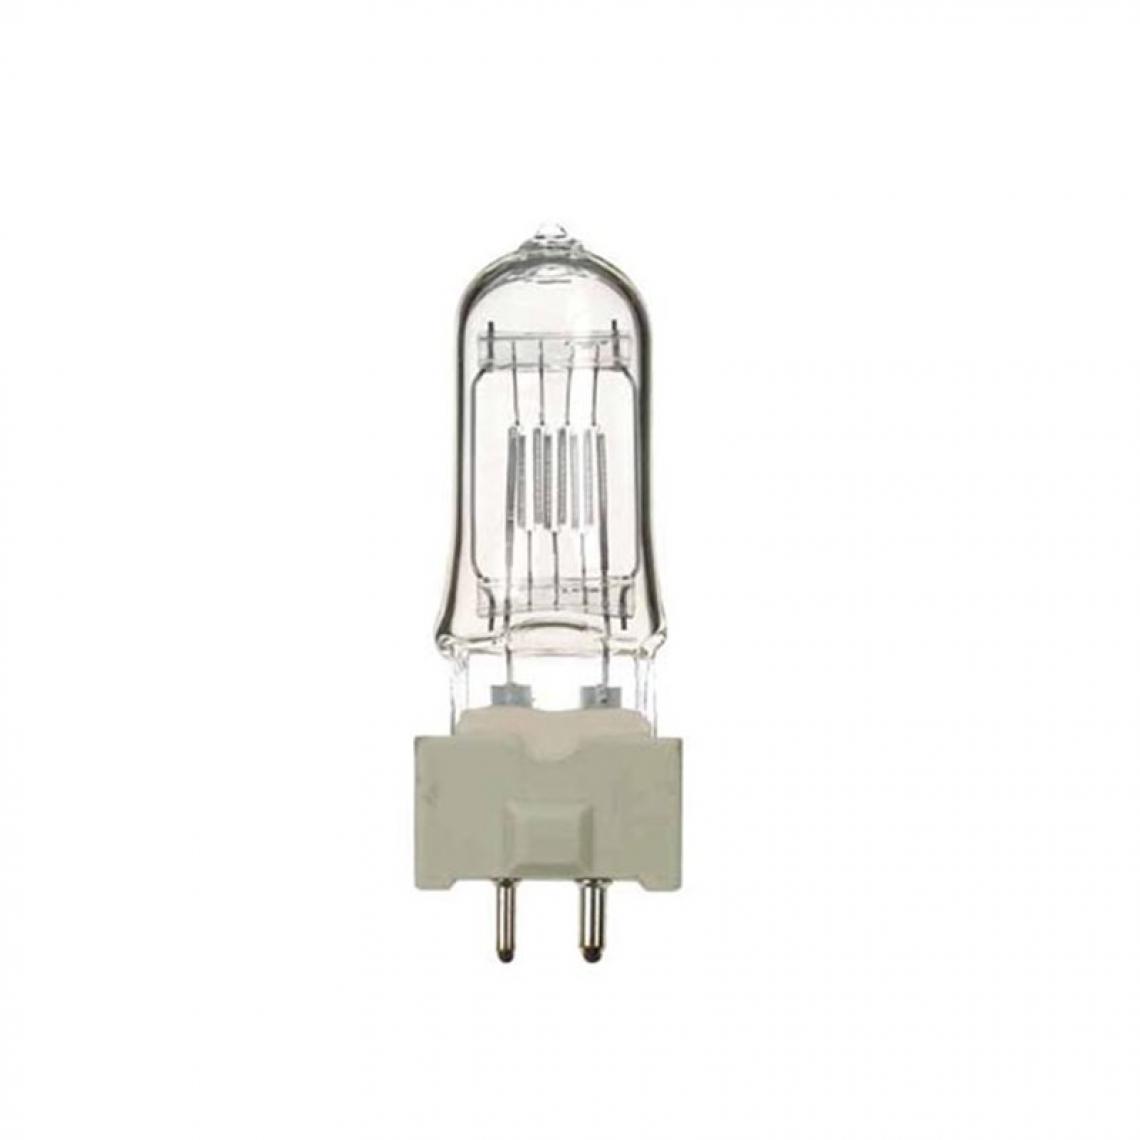 Perel - Halogen Lamp Ge Lighting 500W / 240V, Gy9.5, T25 Gcw (88470) - Ampoules LED